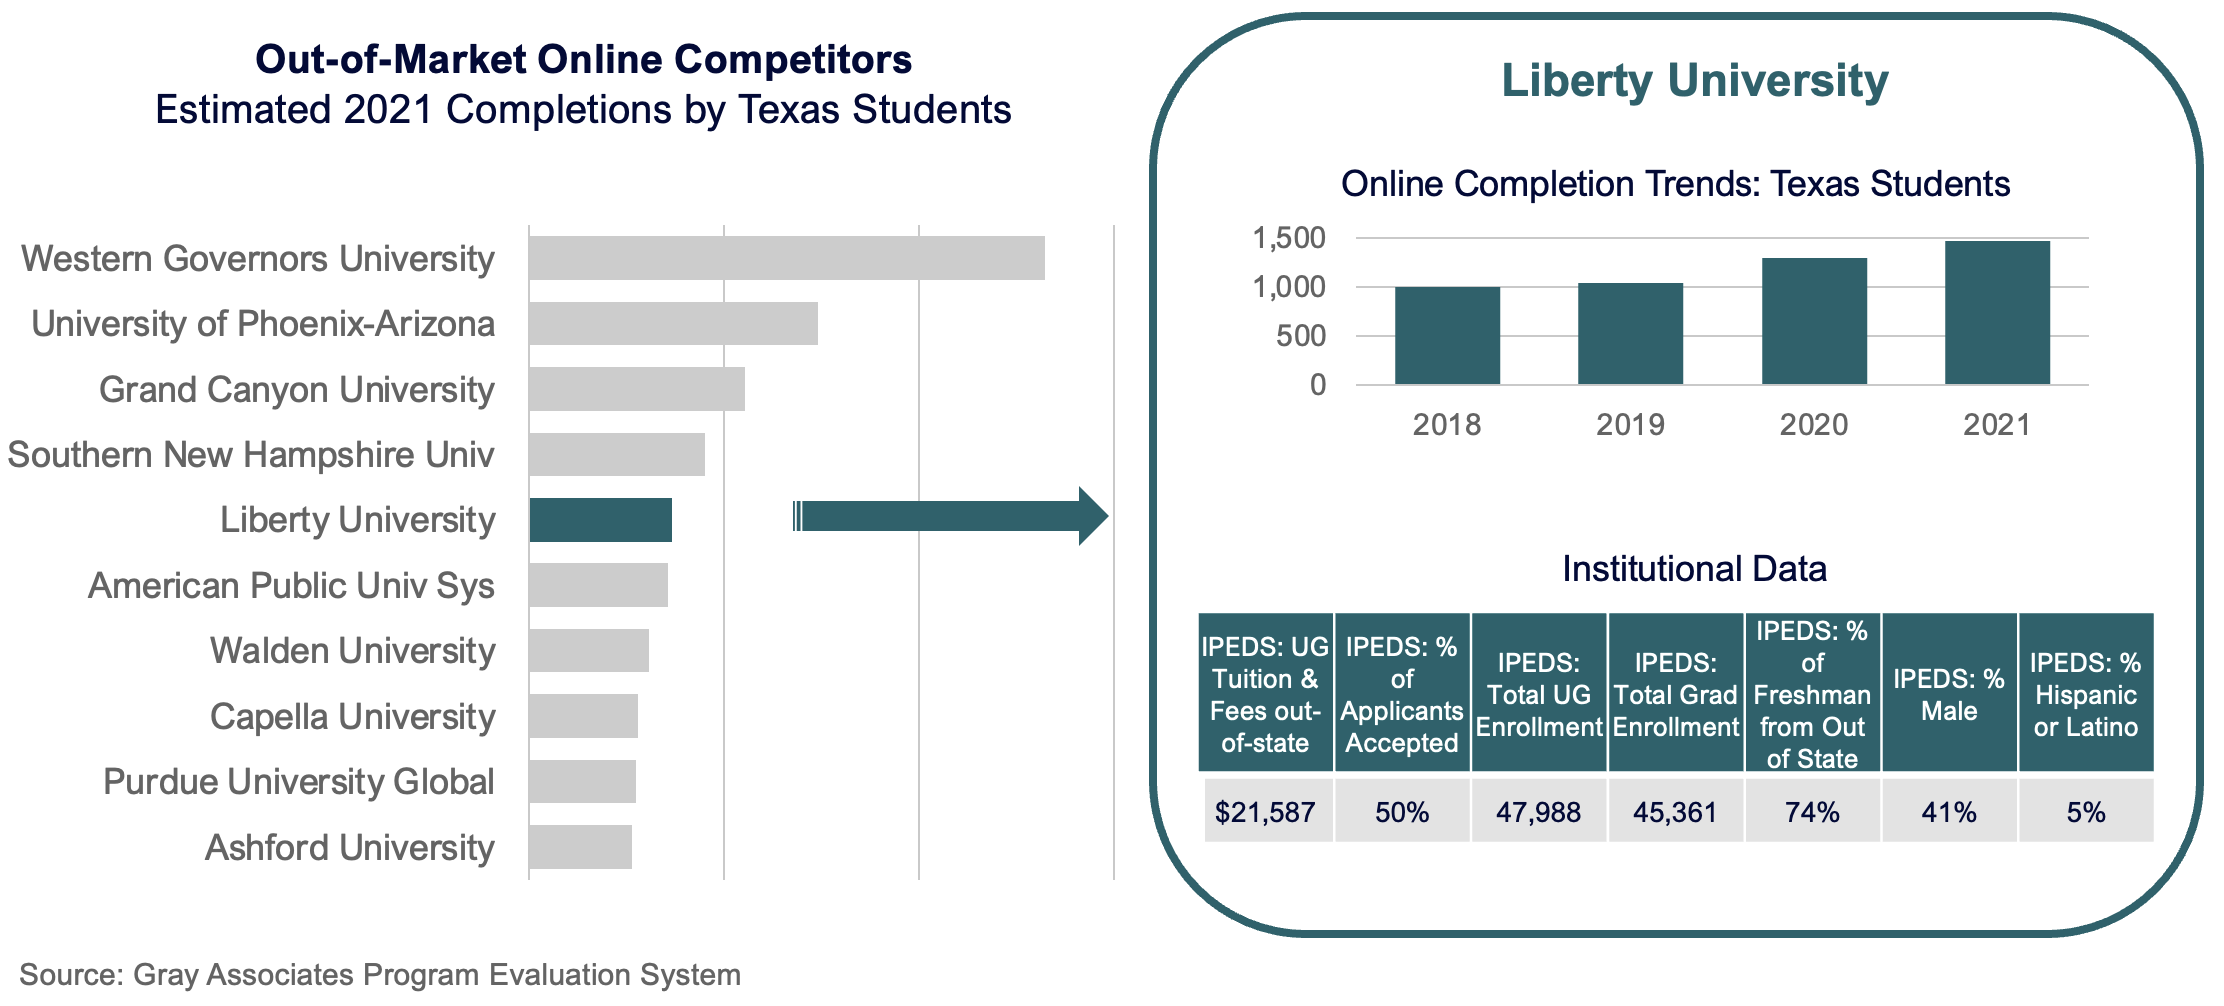 Out of market online competitors (estimates 2021 completions by Texas students)